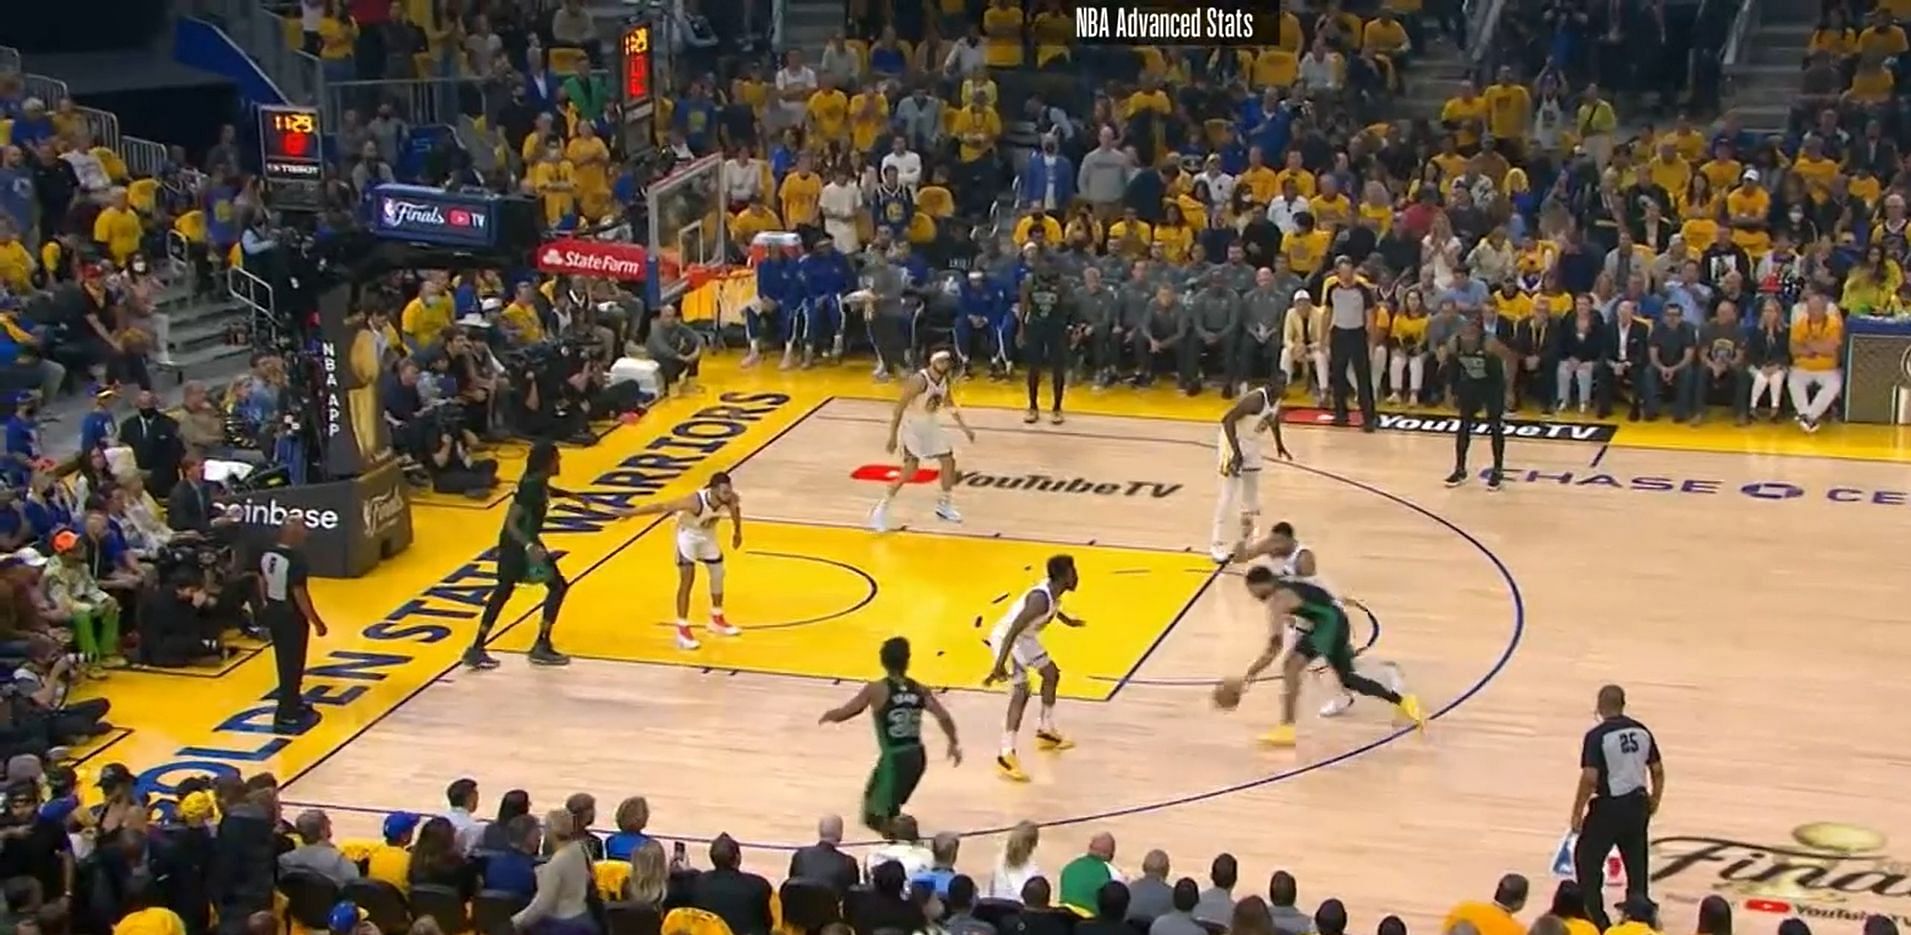 Forced to dribble with his left hand, Tatum drives into the paint.